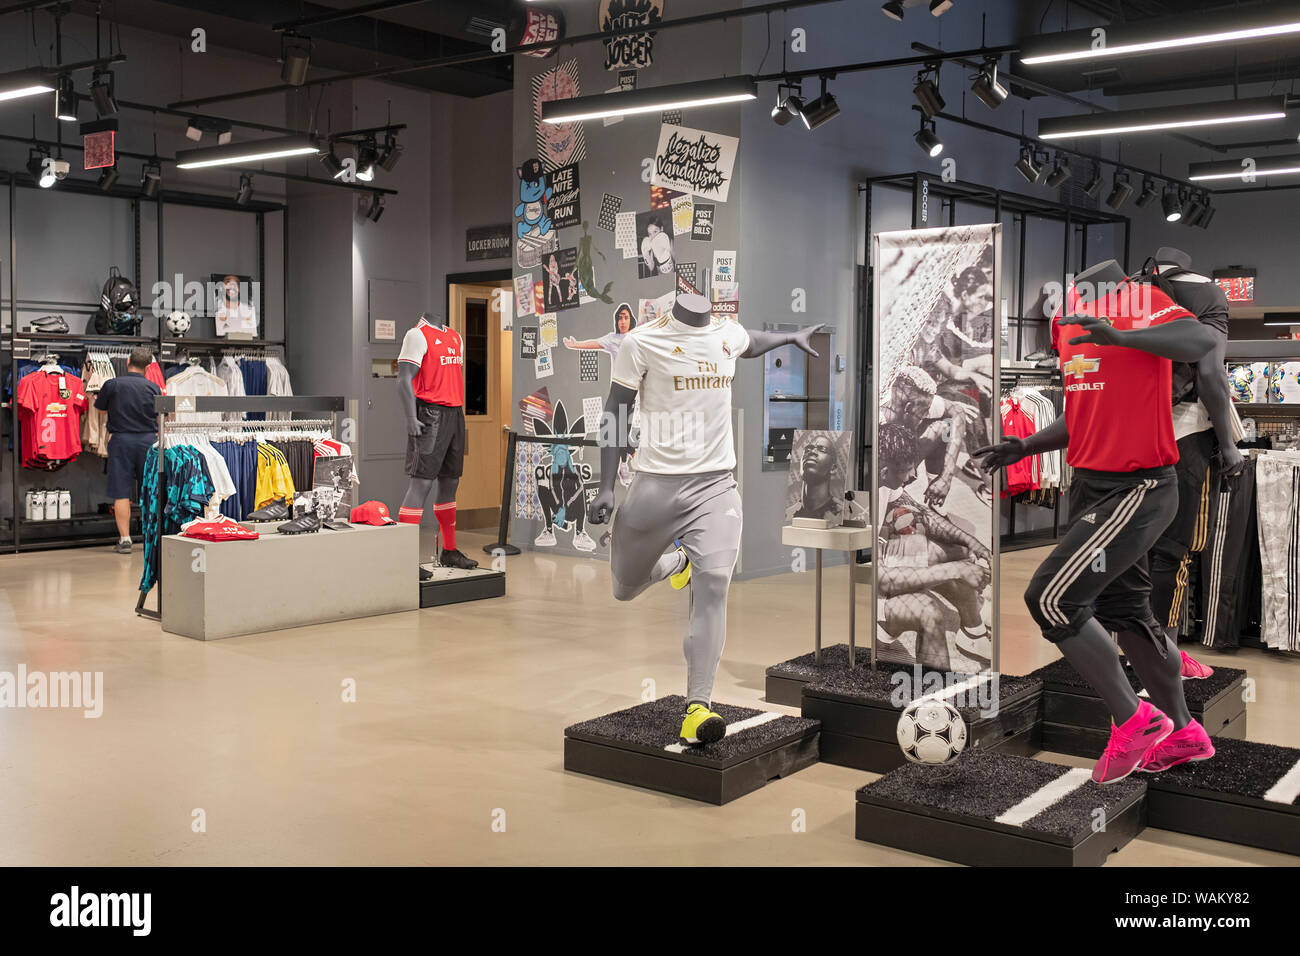 outlet adidas new york